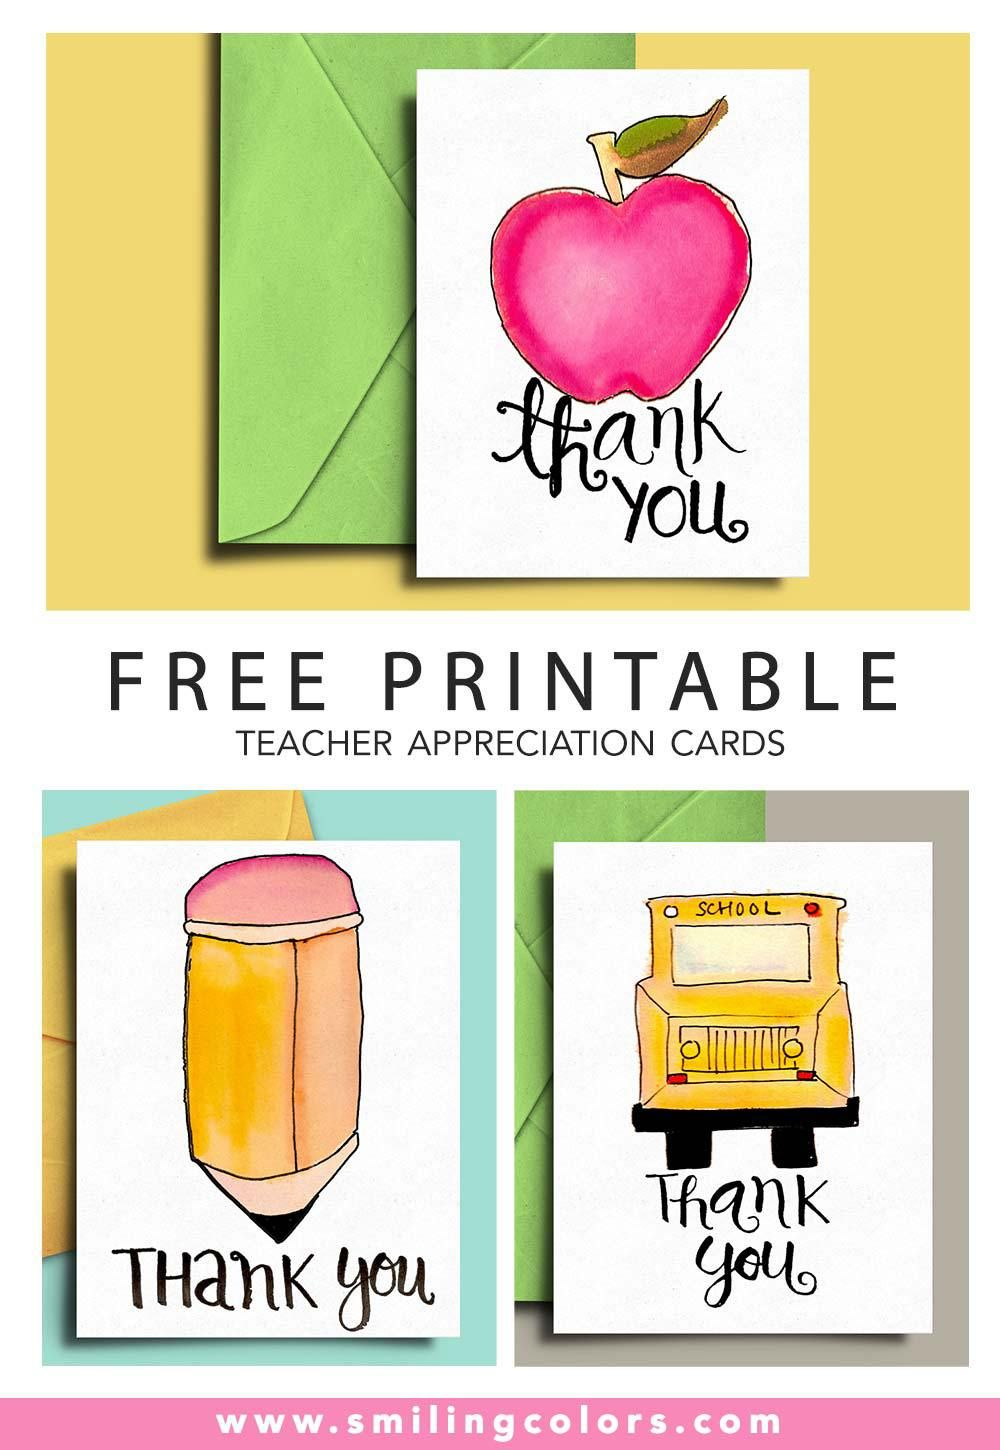 Thank You Card For Teacher And School Bus Driver With Free Inside Thank You Card For Teacher Template